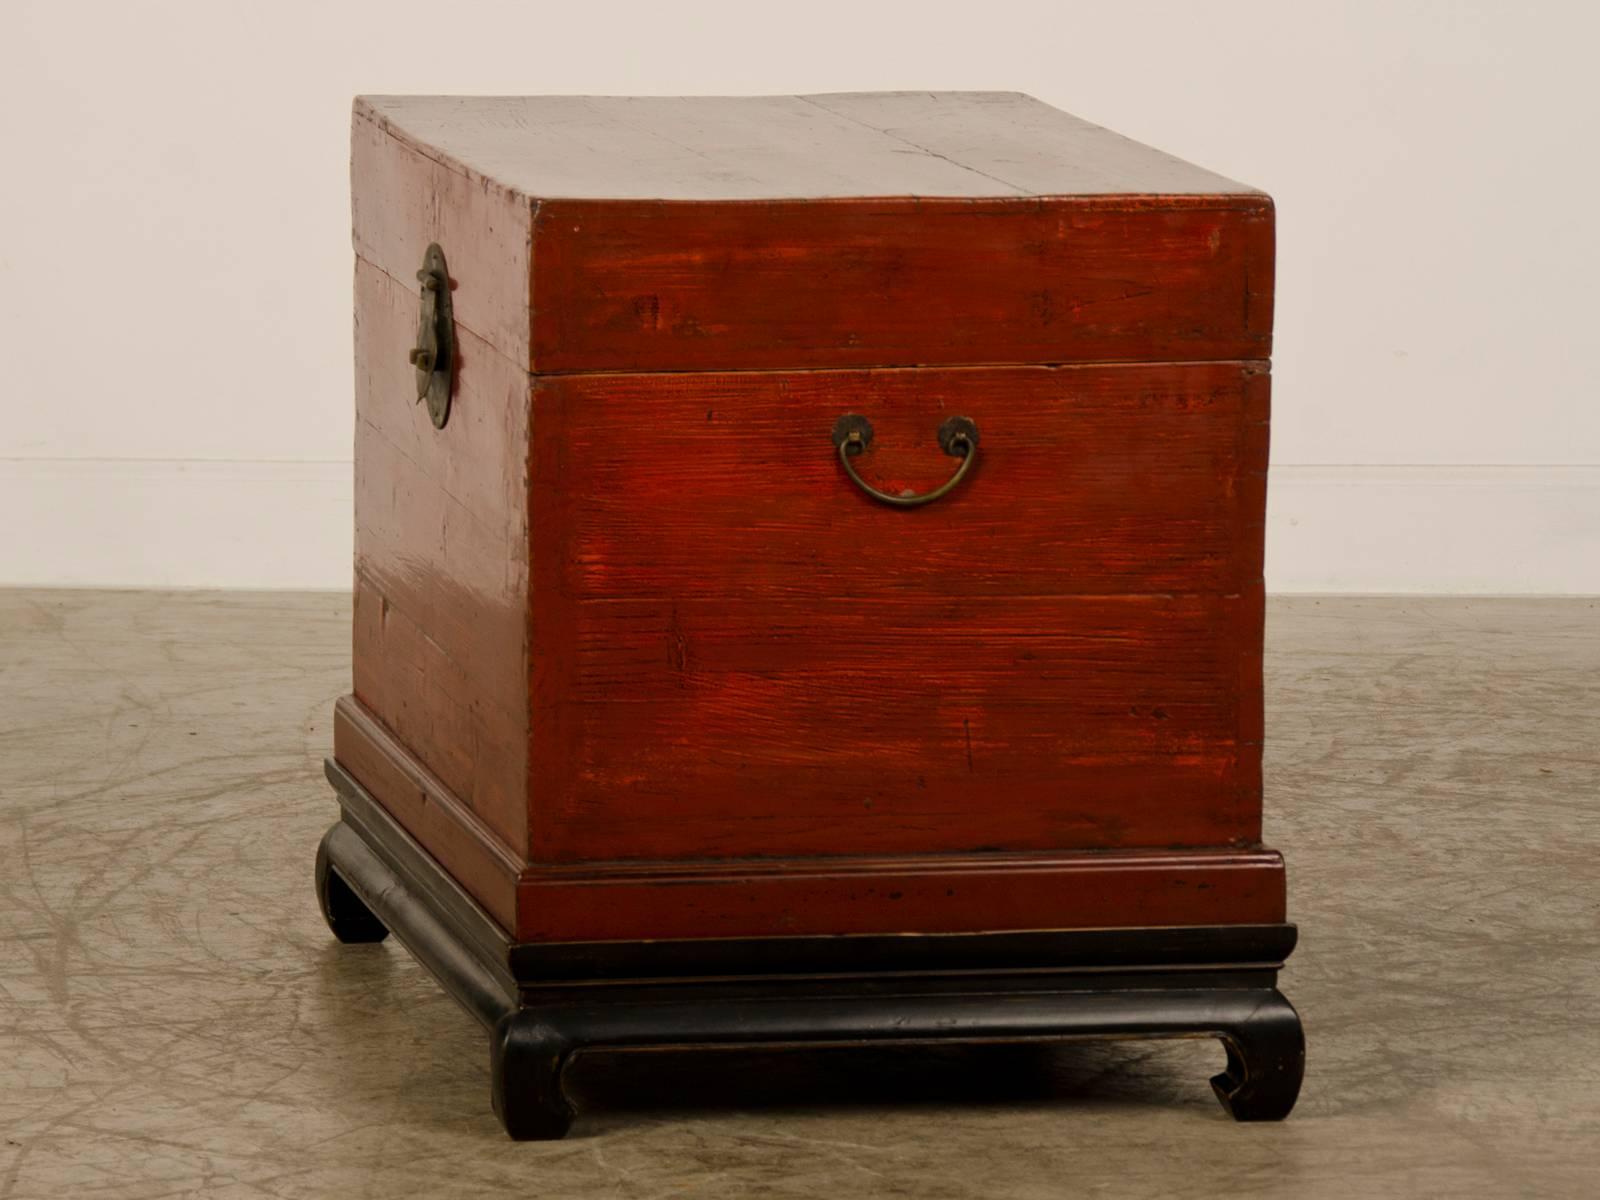 Qing Red Lacquer Antique Chinese Trunk Kuang Hsu Period China, circa 1875